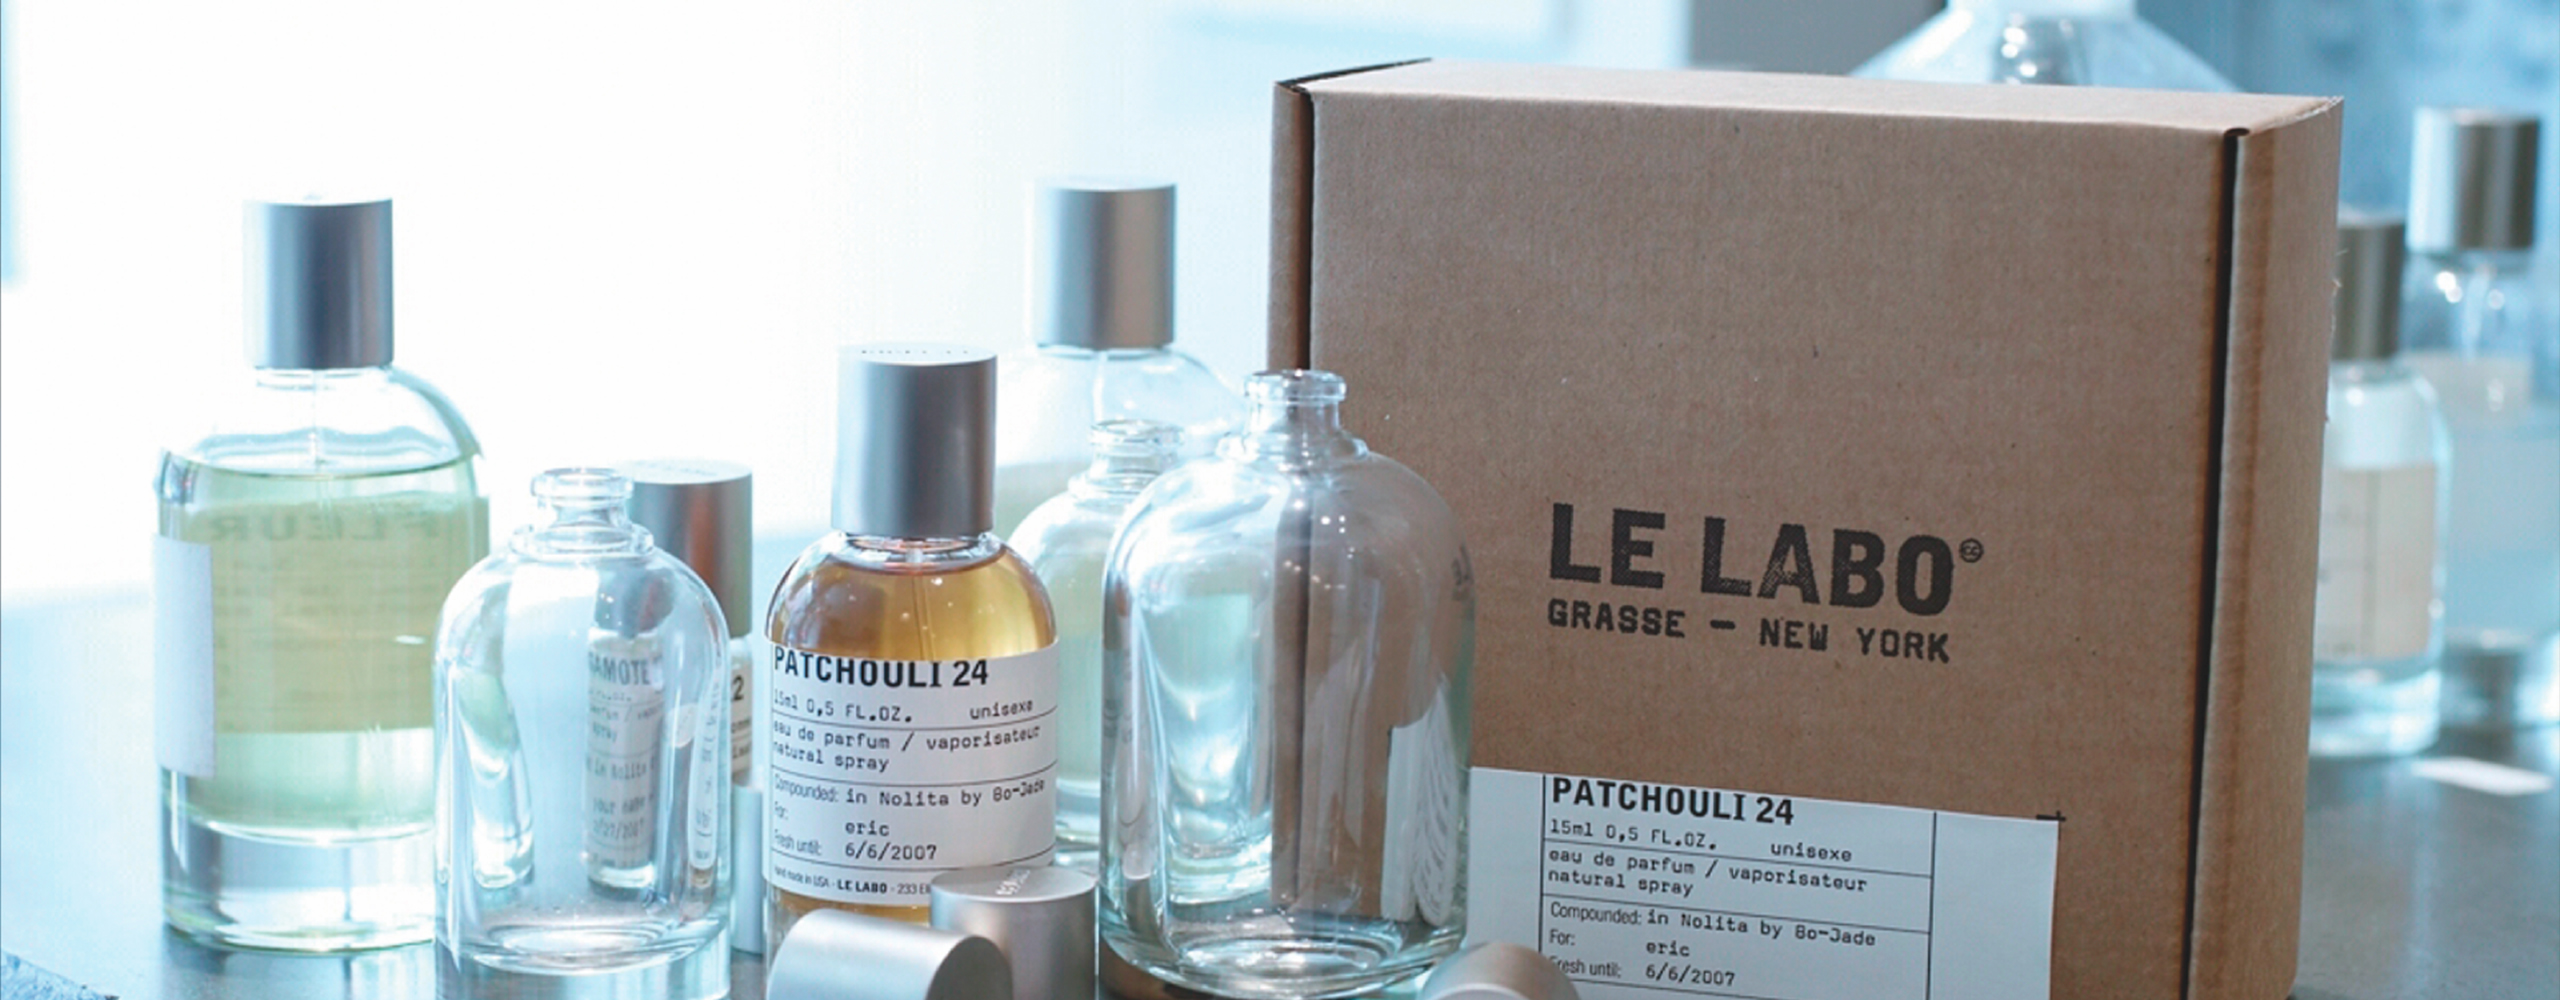 Perfume Packaging: Design & Label Application Tips for Your New Perfume  Bottles